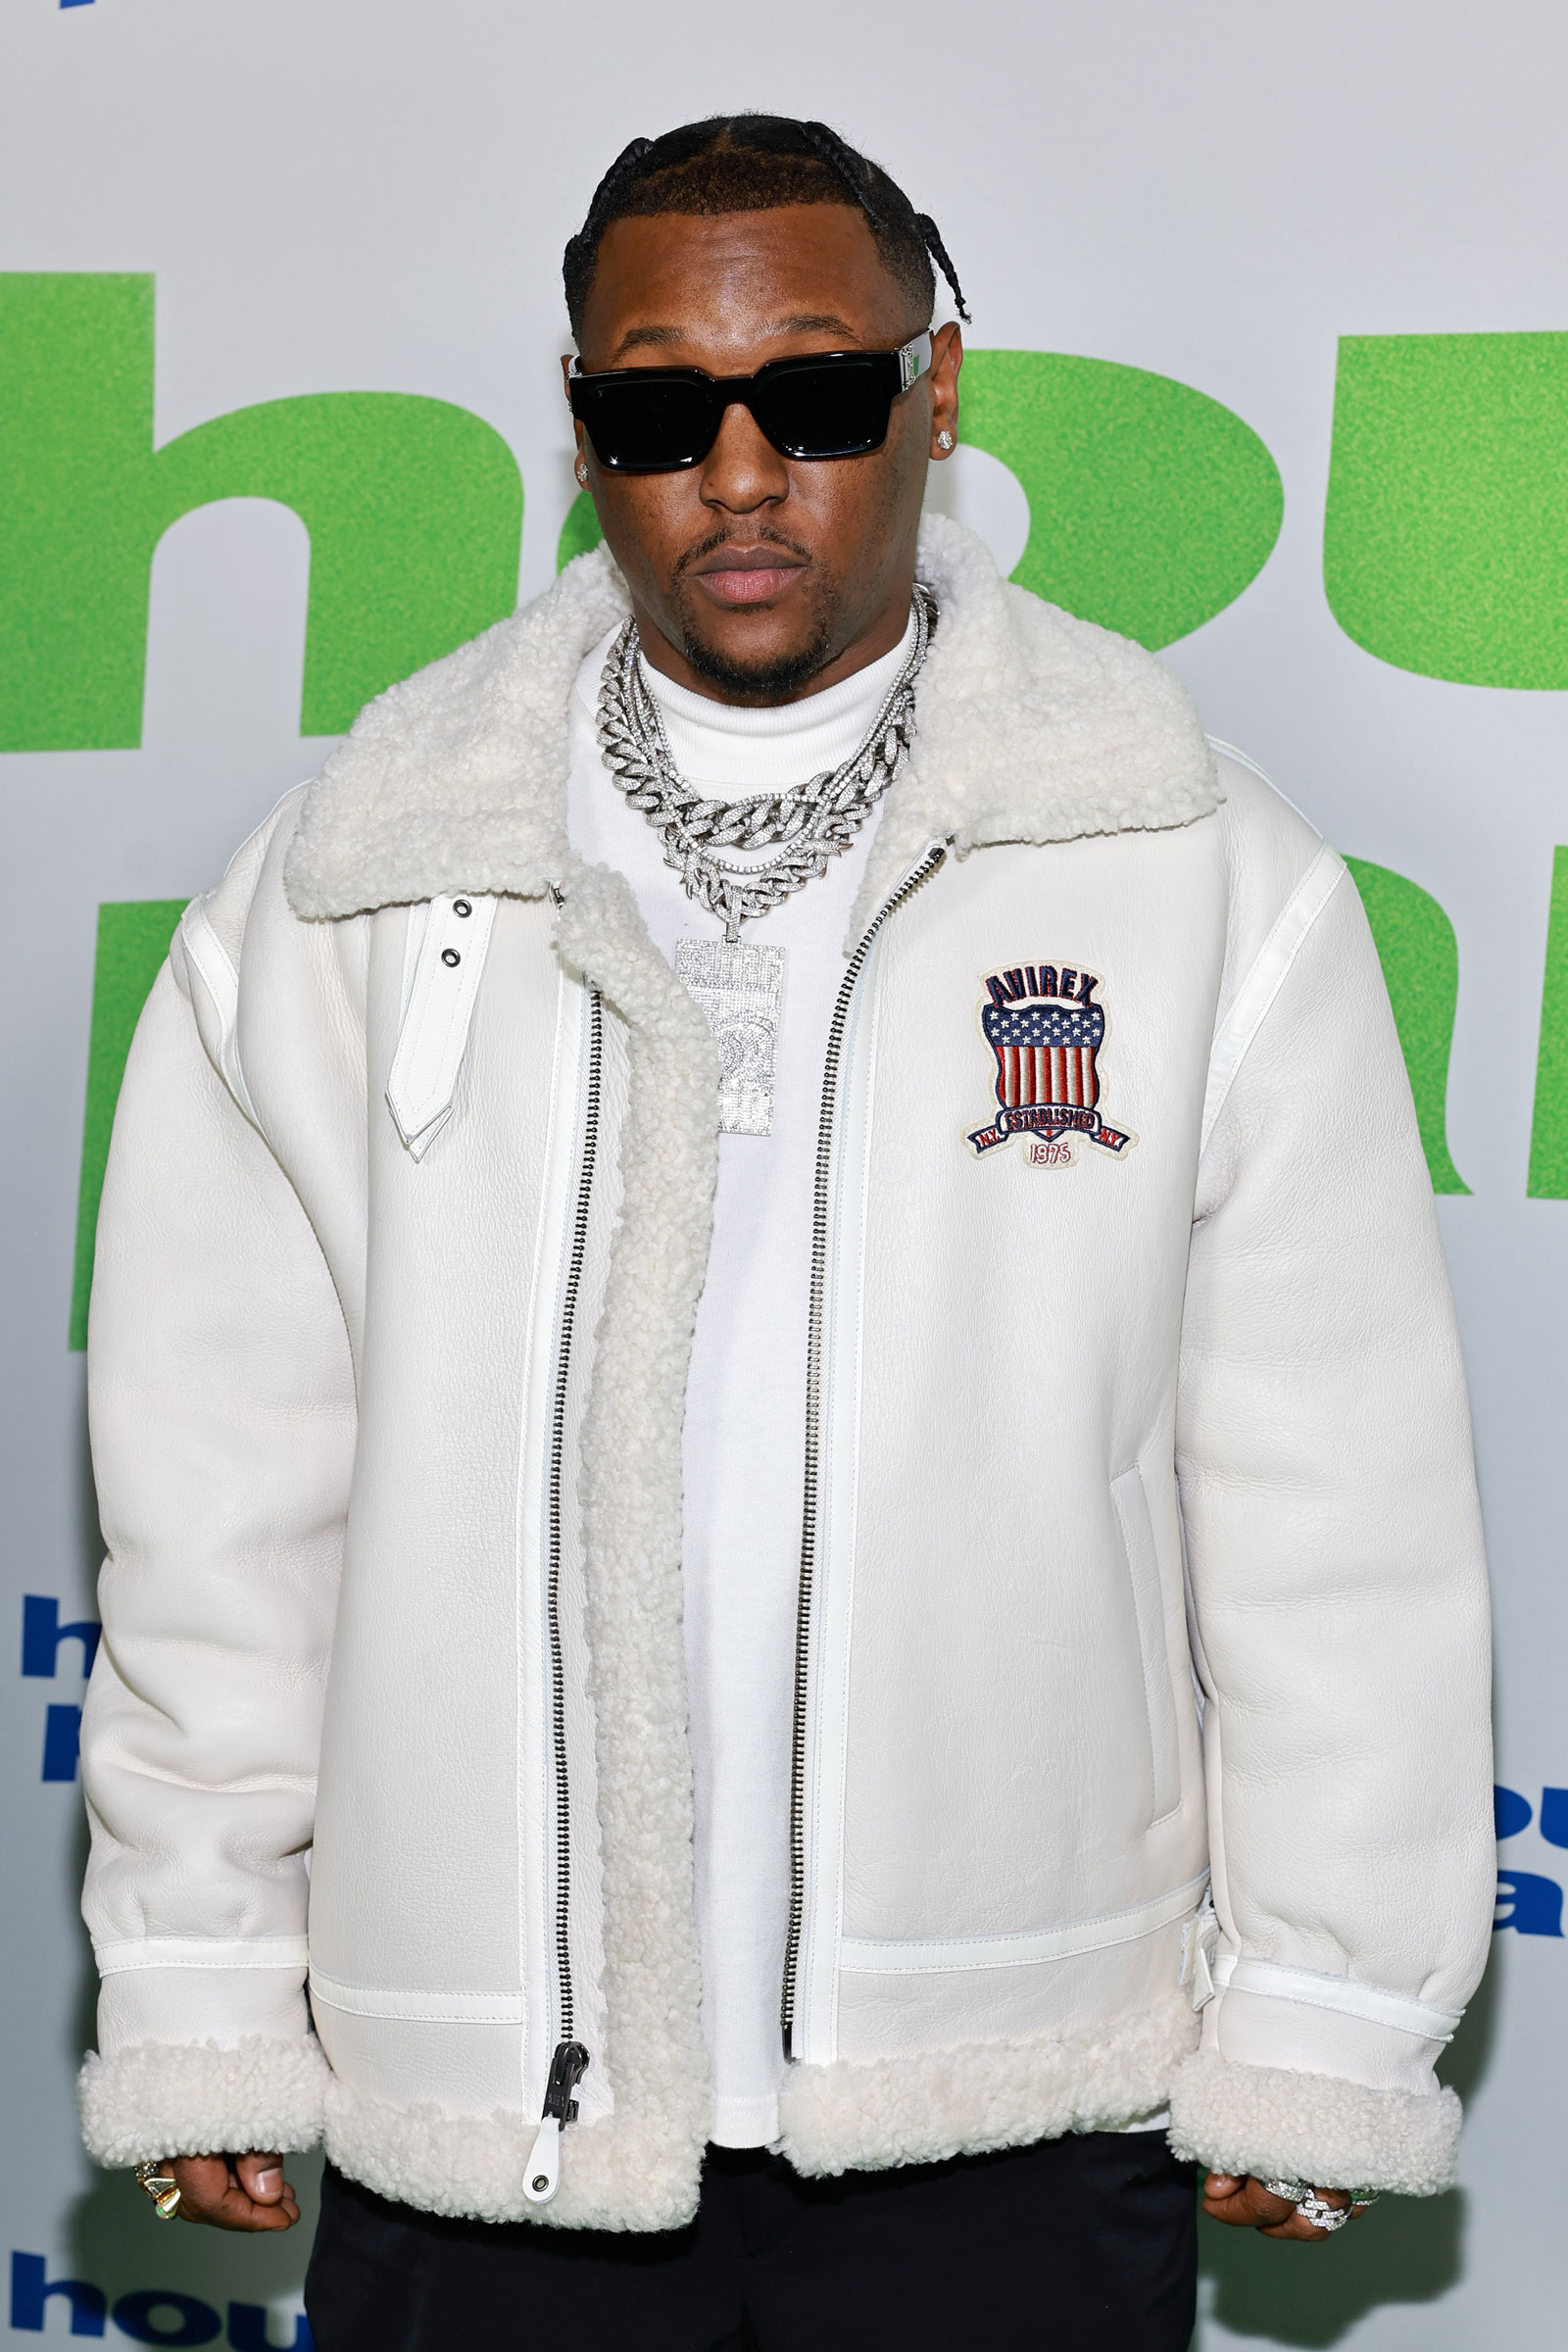 HOLLYWOOD, CALIFORNIA - JANUARY 11: Hit-Boy attends the Special Red Carpet Screening for New Line Cinema's "House Party" at TCL Chinese 6 Theatres on January 11, 2023 in Hollywood, California. (Photo by Matt Winkelmeyer/Getty Images) (Getty Images—2023 Getty Images)